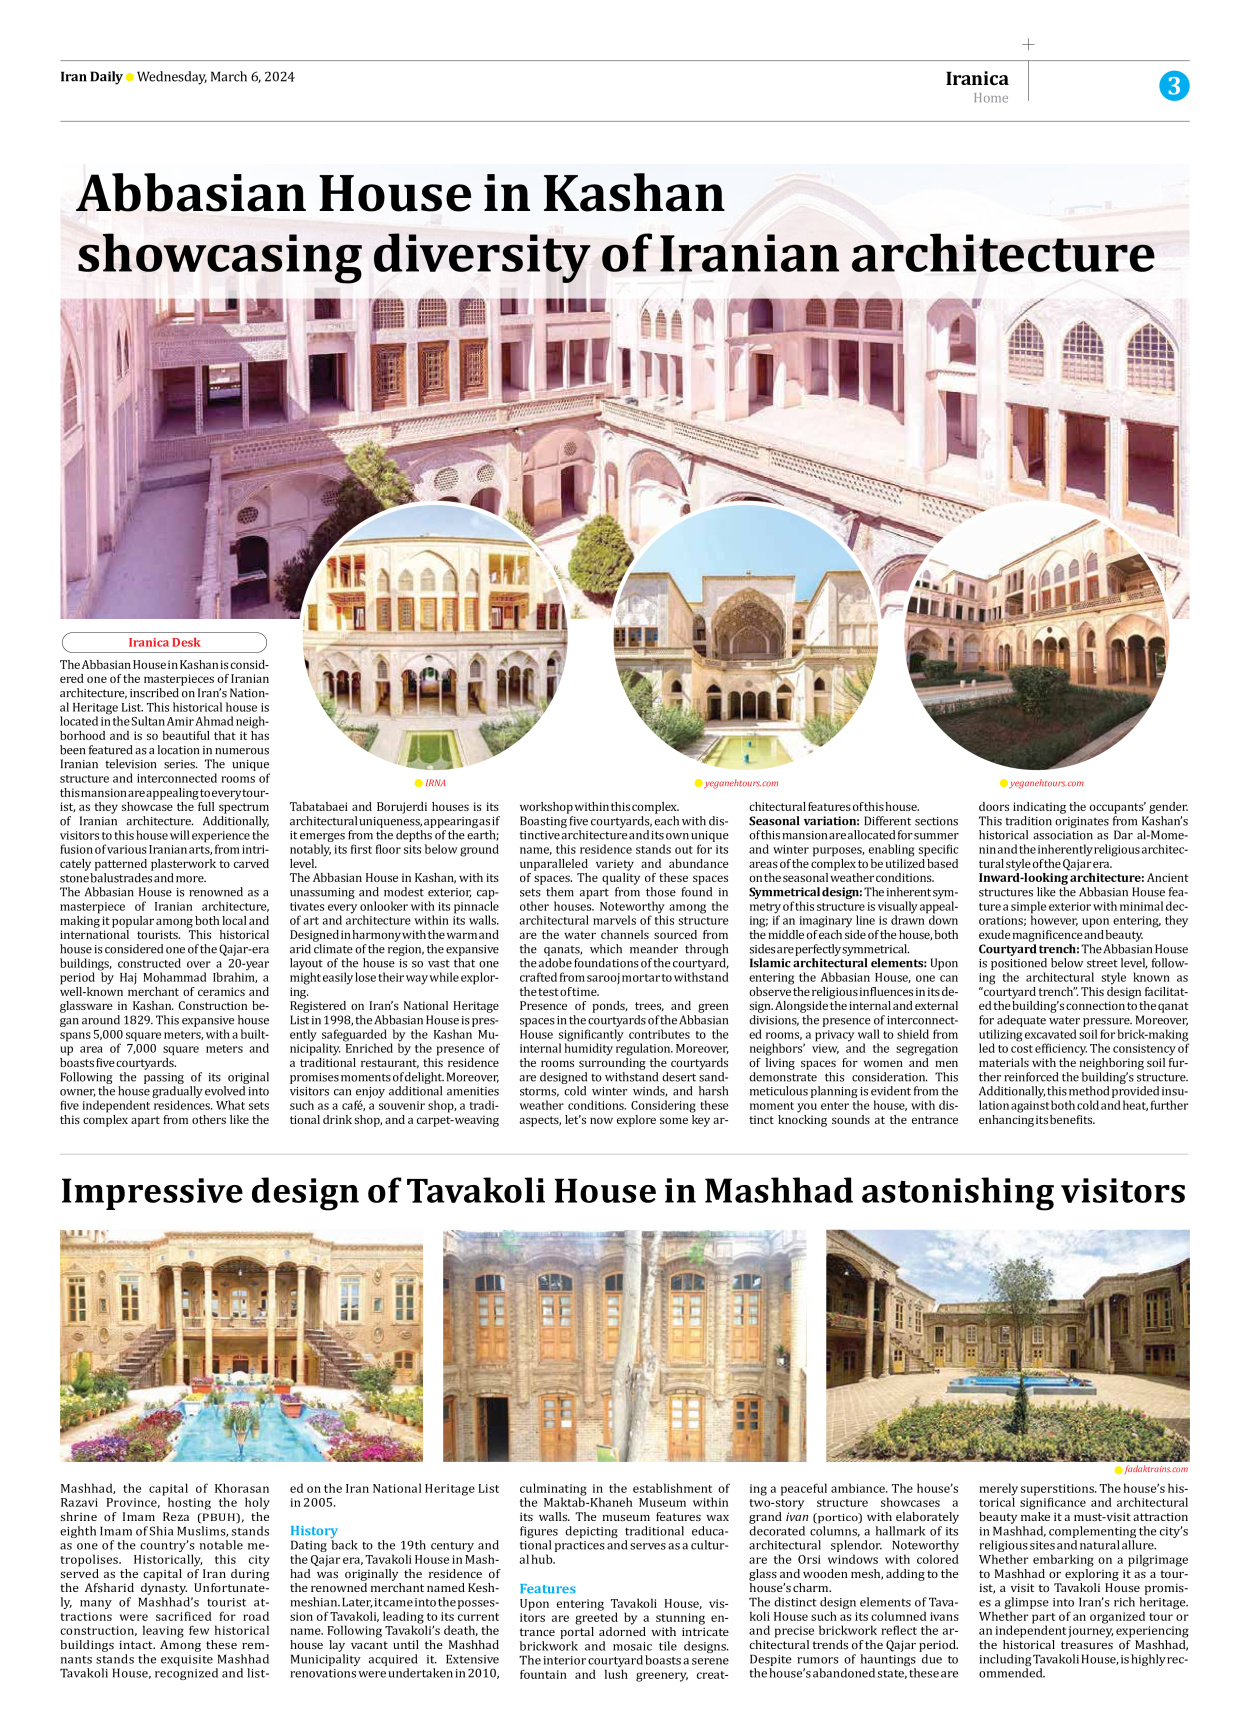 Iran Daily - Number Seven Thousand Five Hundred and Twenty Three - 06 March 2024 - Page 3